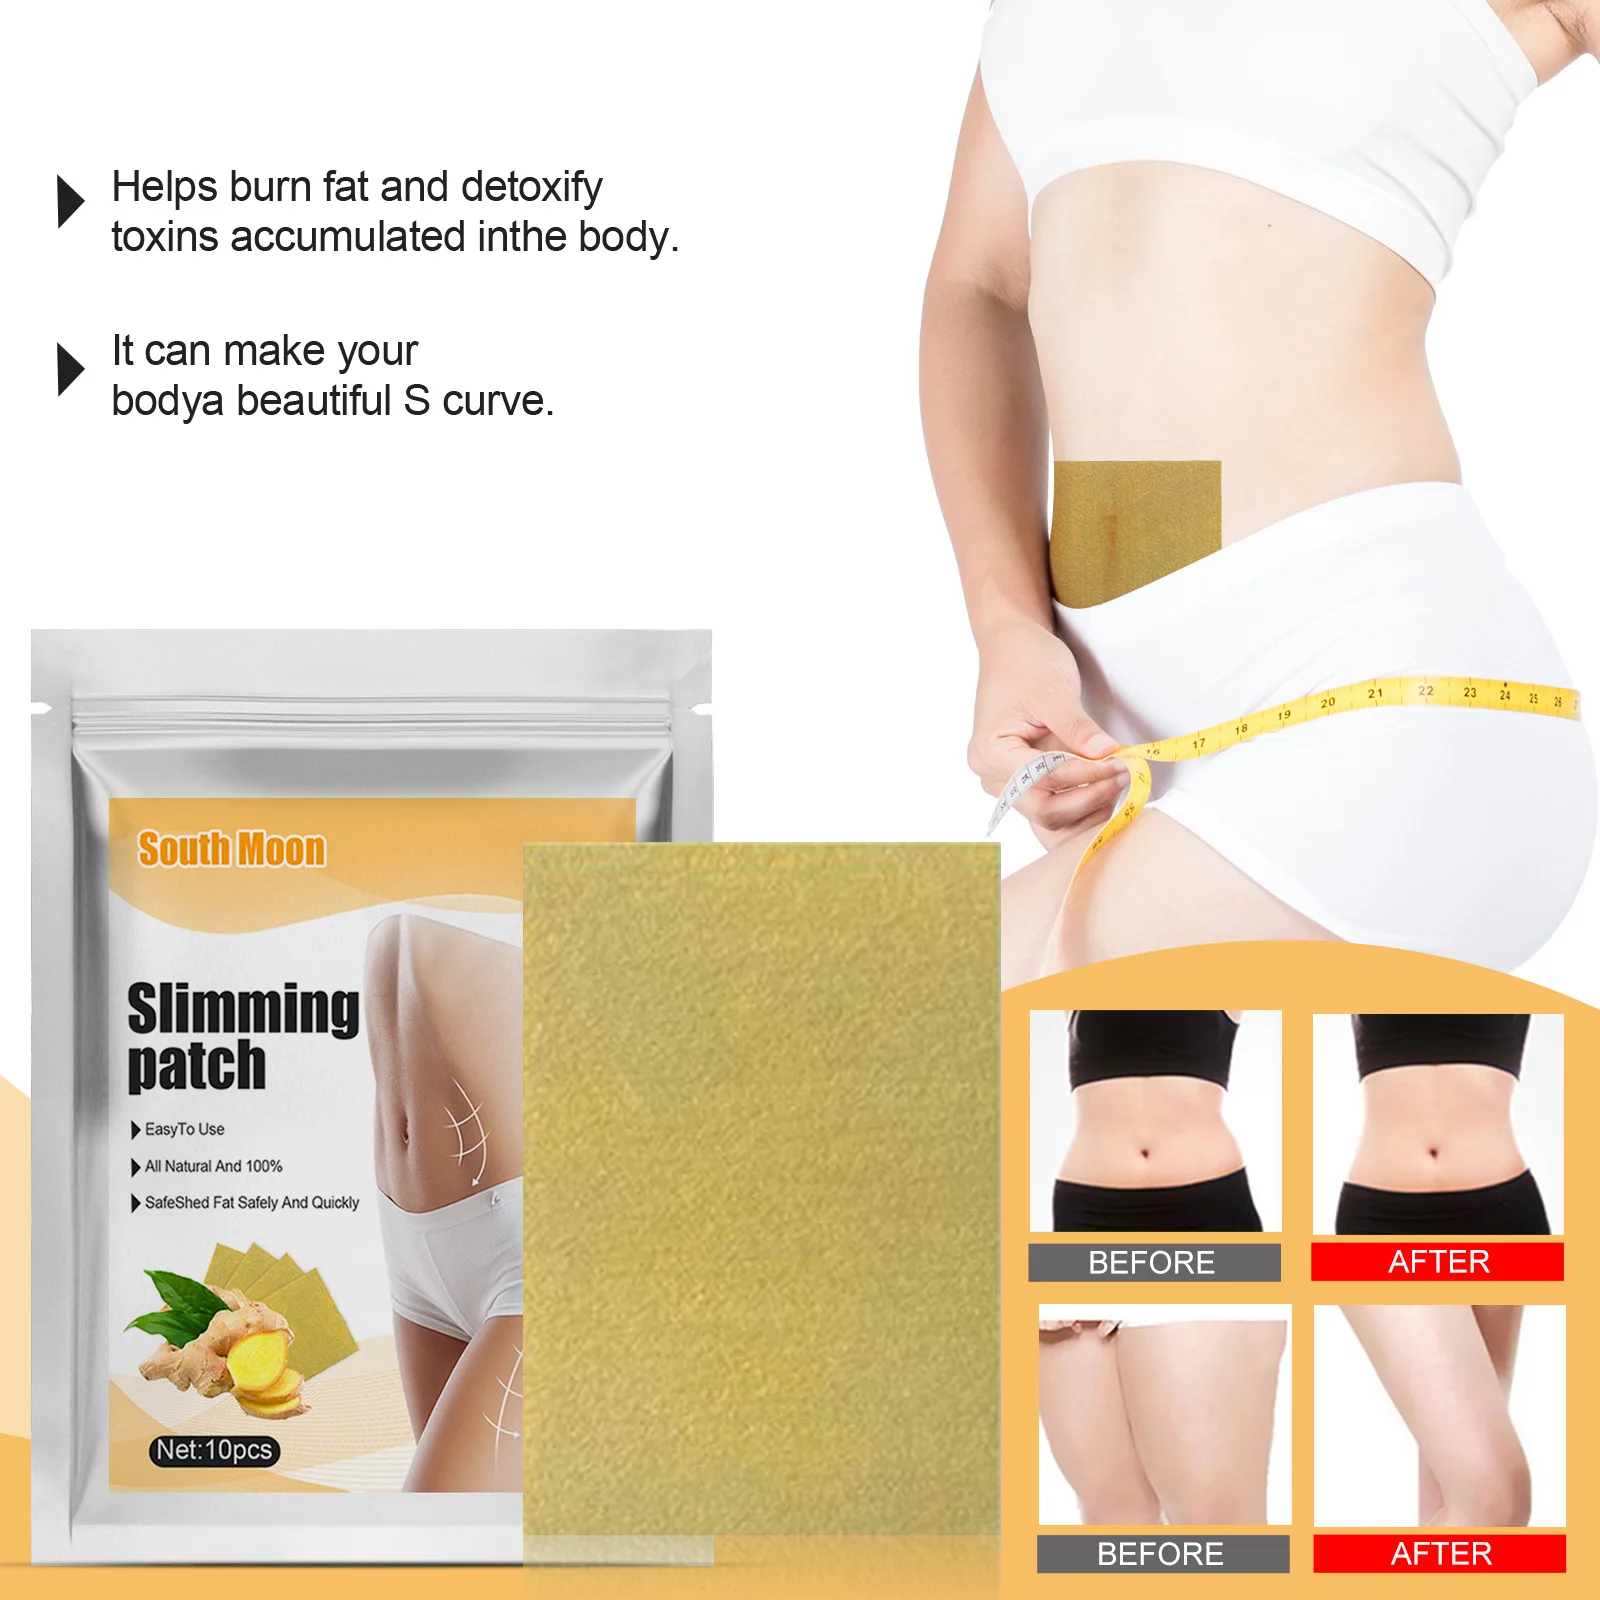 

Slim Patch Weight Loss ginger Detox Patch Fat Burning Lose Weight Chinese Herbal Medical Plaster Health Slimming Navel Stick